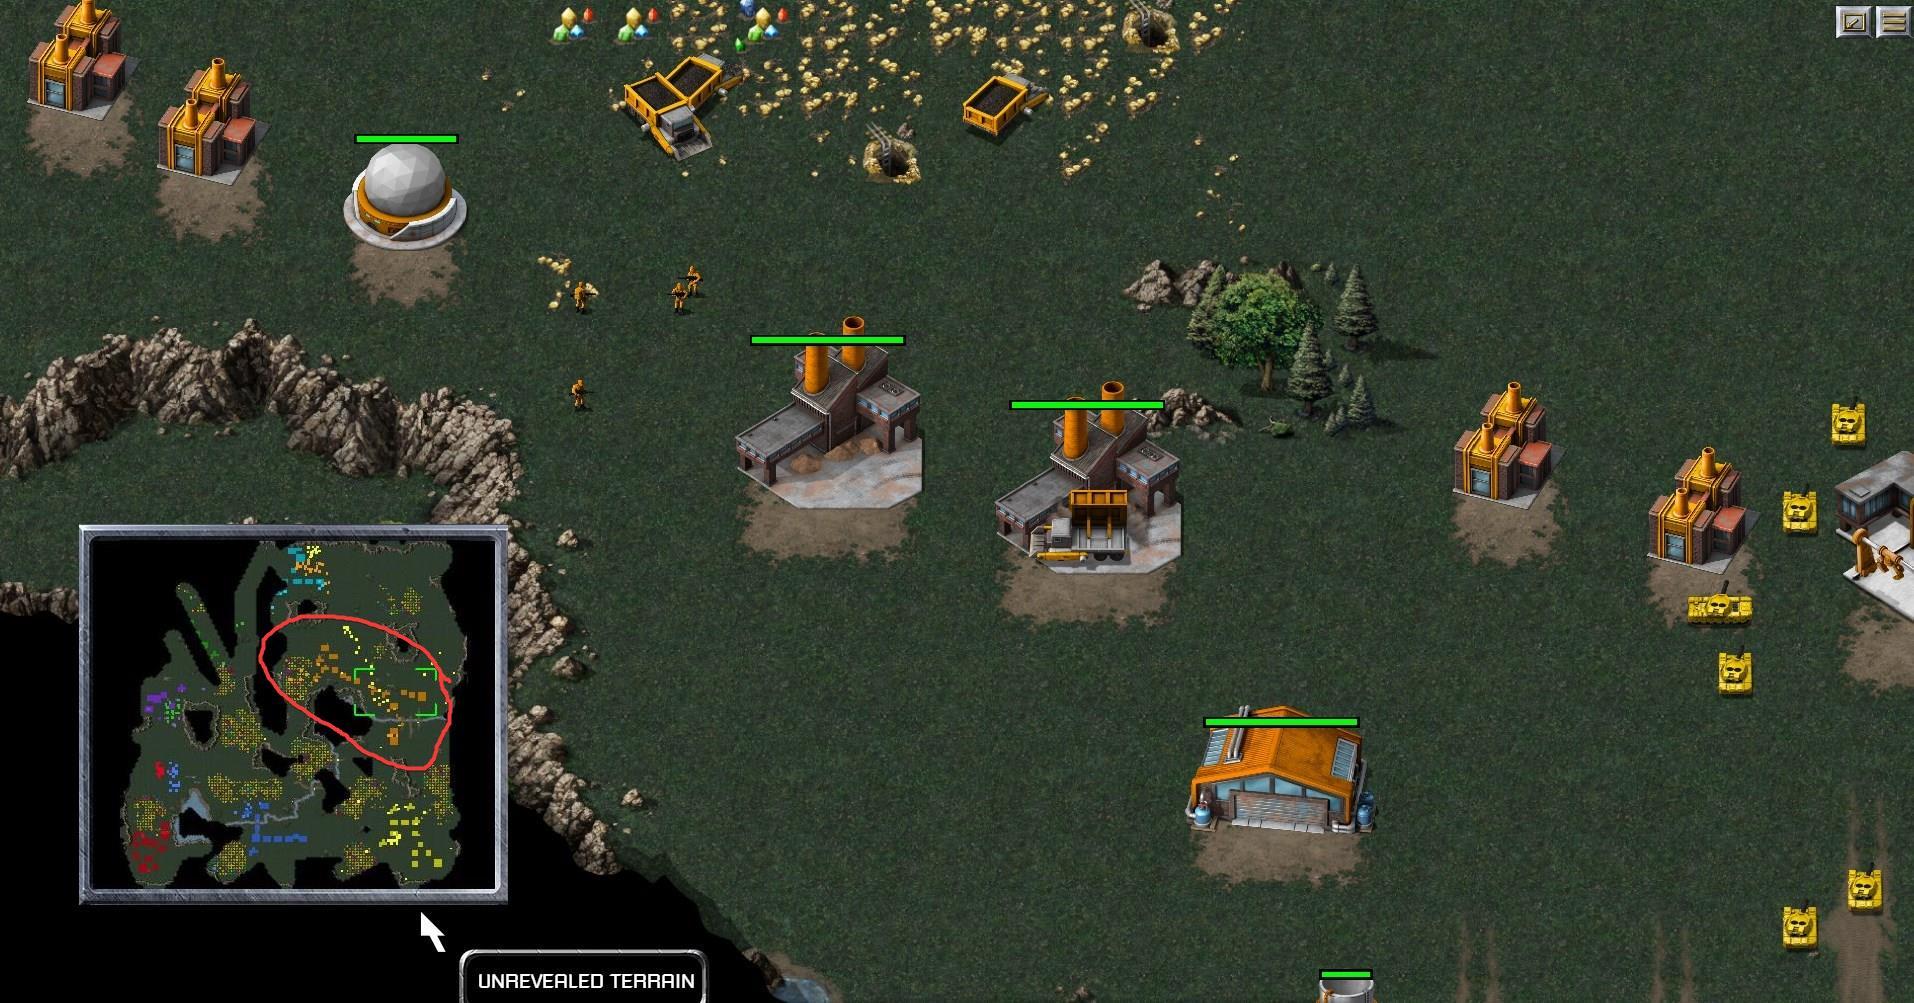 undulate gennemsnit Klappe Command and Conquer Red Alert Remastered Online PVP Tips, Guide and  Strategy | Junglebiscuit